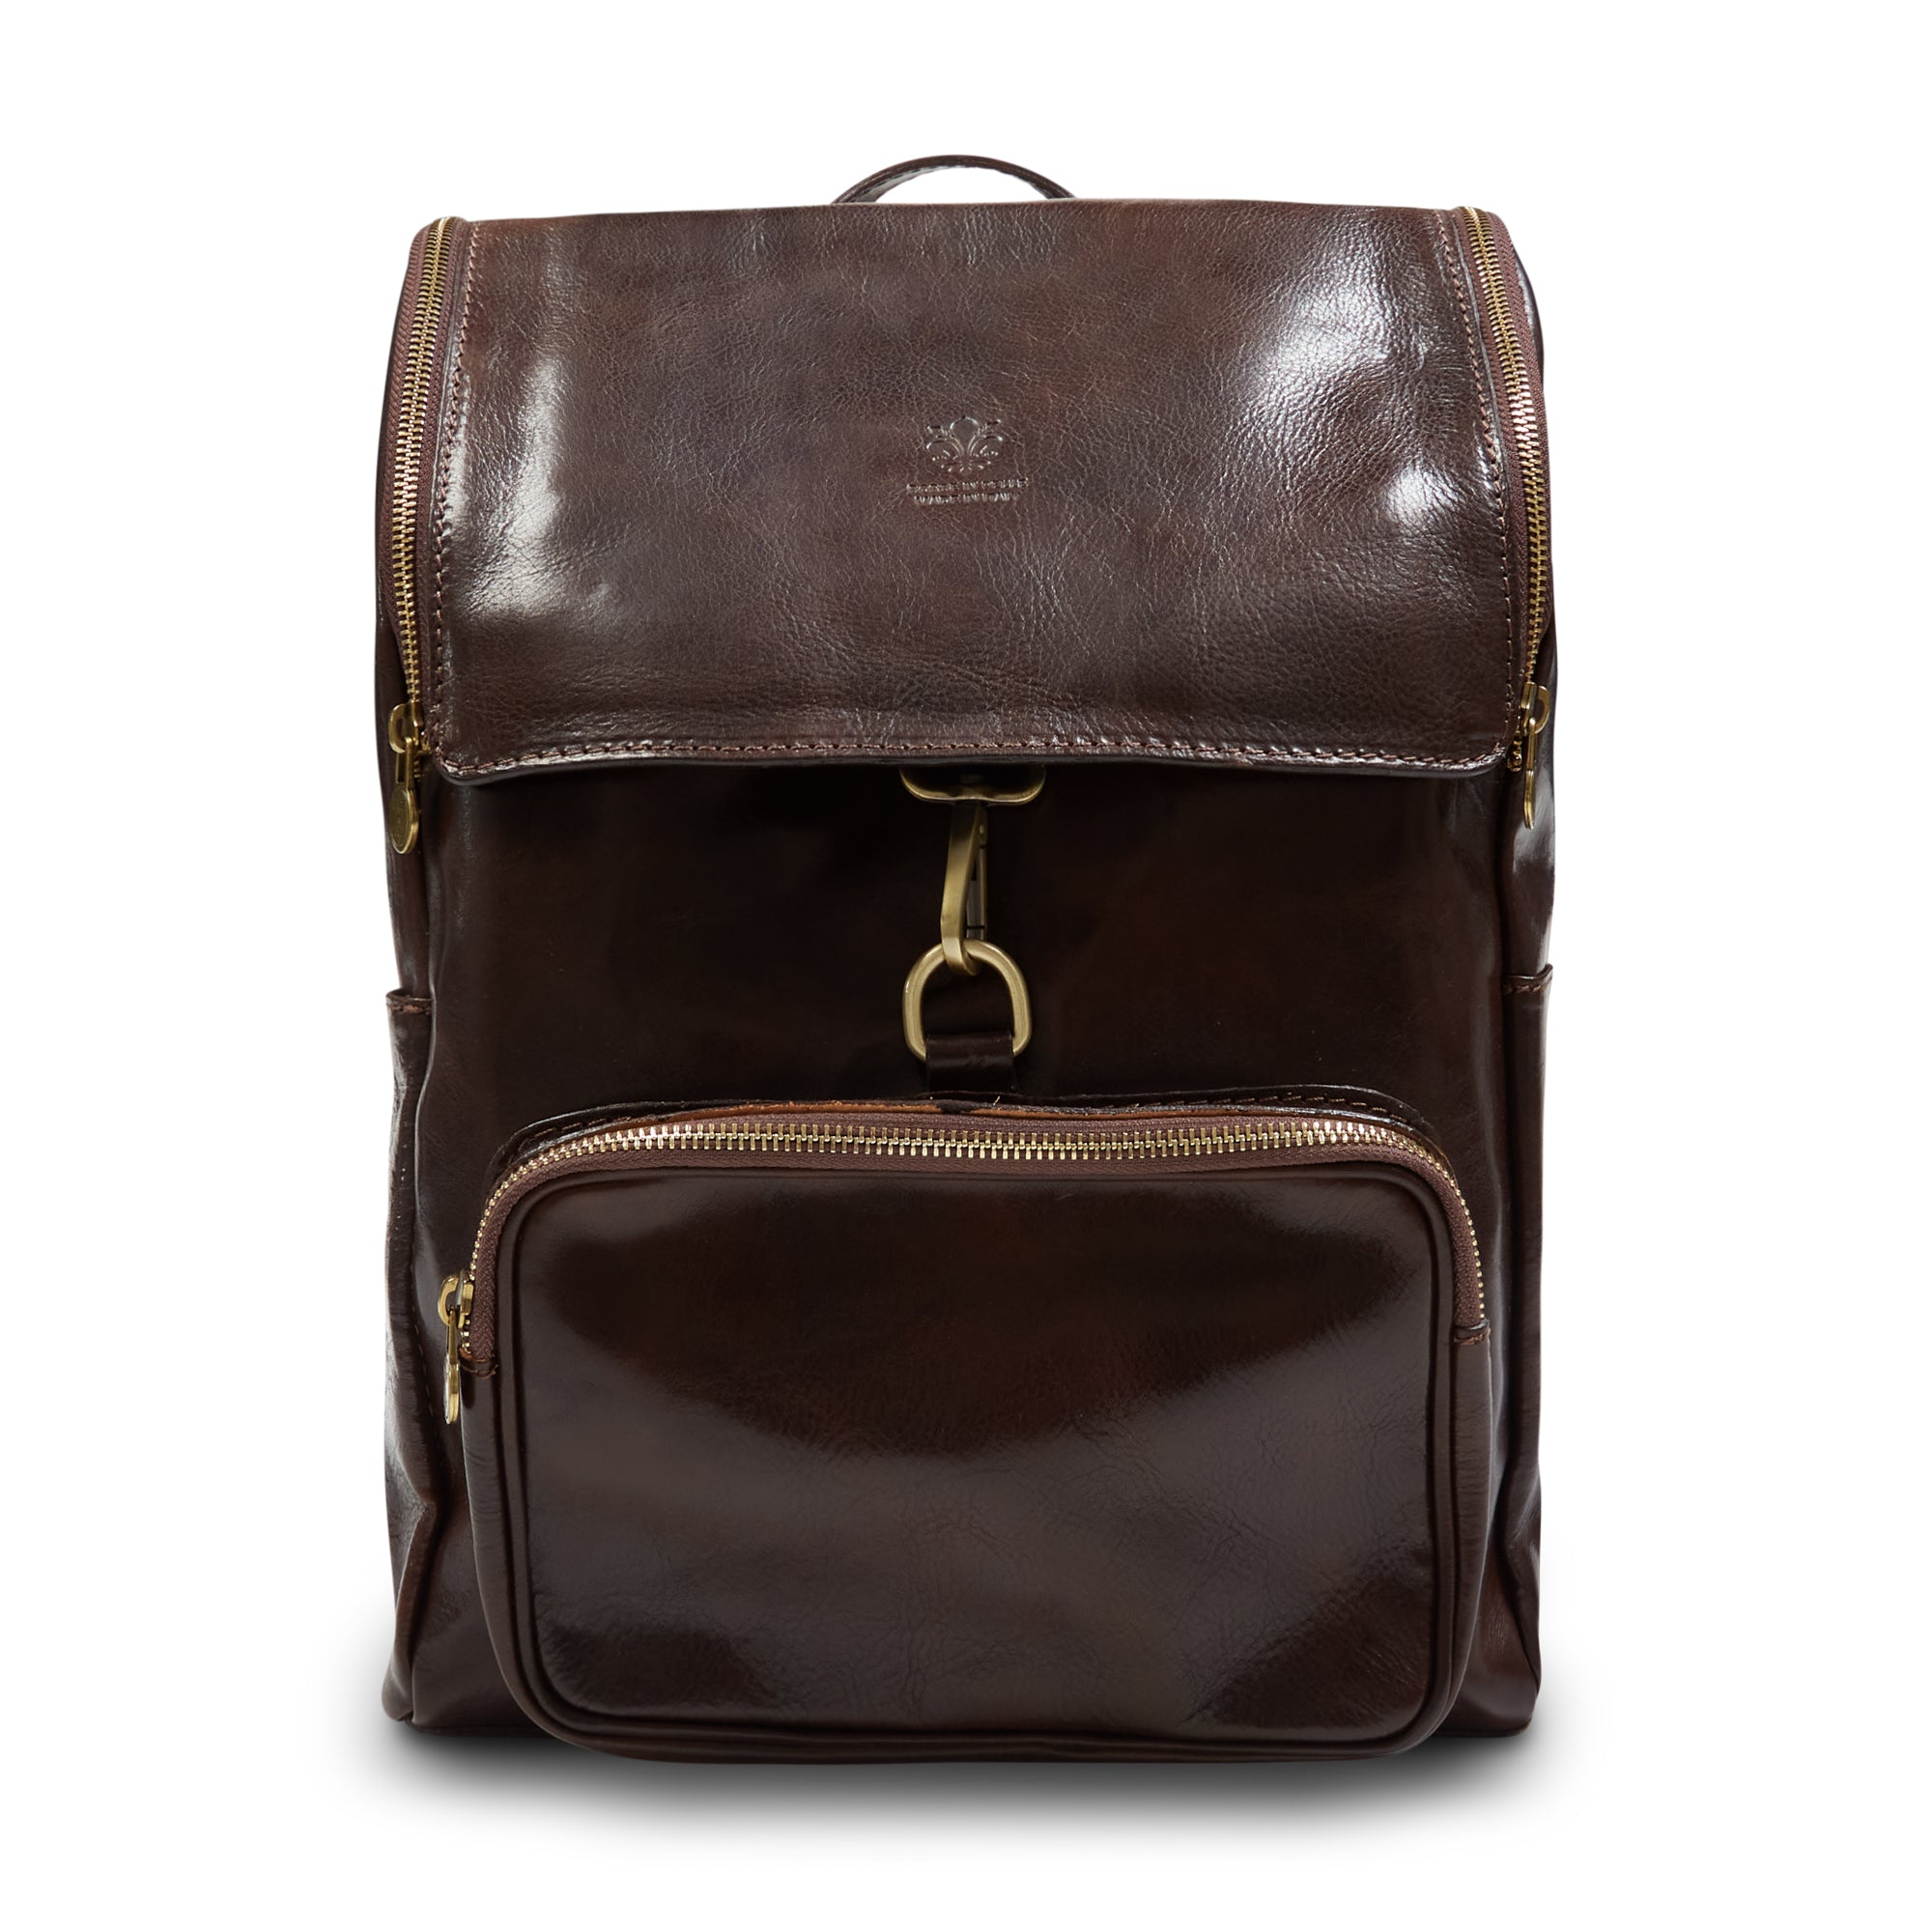 Burrows & Hare  Leather Backpack - Dark Tan